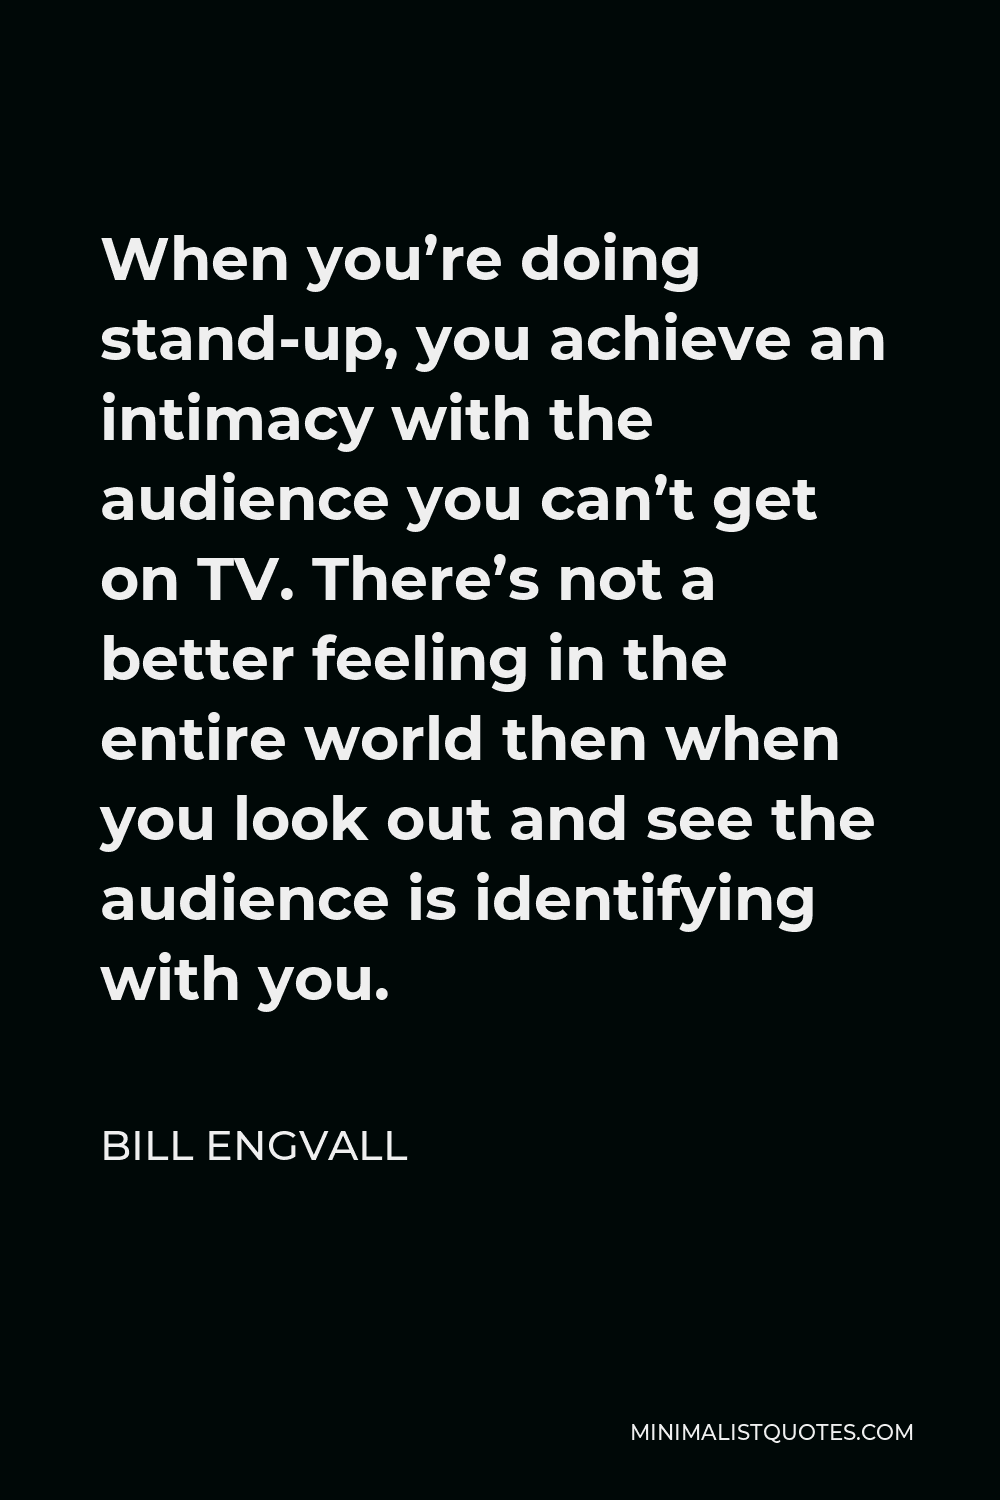 Bill Engvall Quote - When you’re doing stand-up, you achieve an intimacy with the audience you can’t get on TV. There’s not a better feeling in the entire world then when you look out and see the audience is identifying with you.